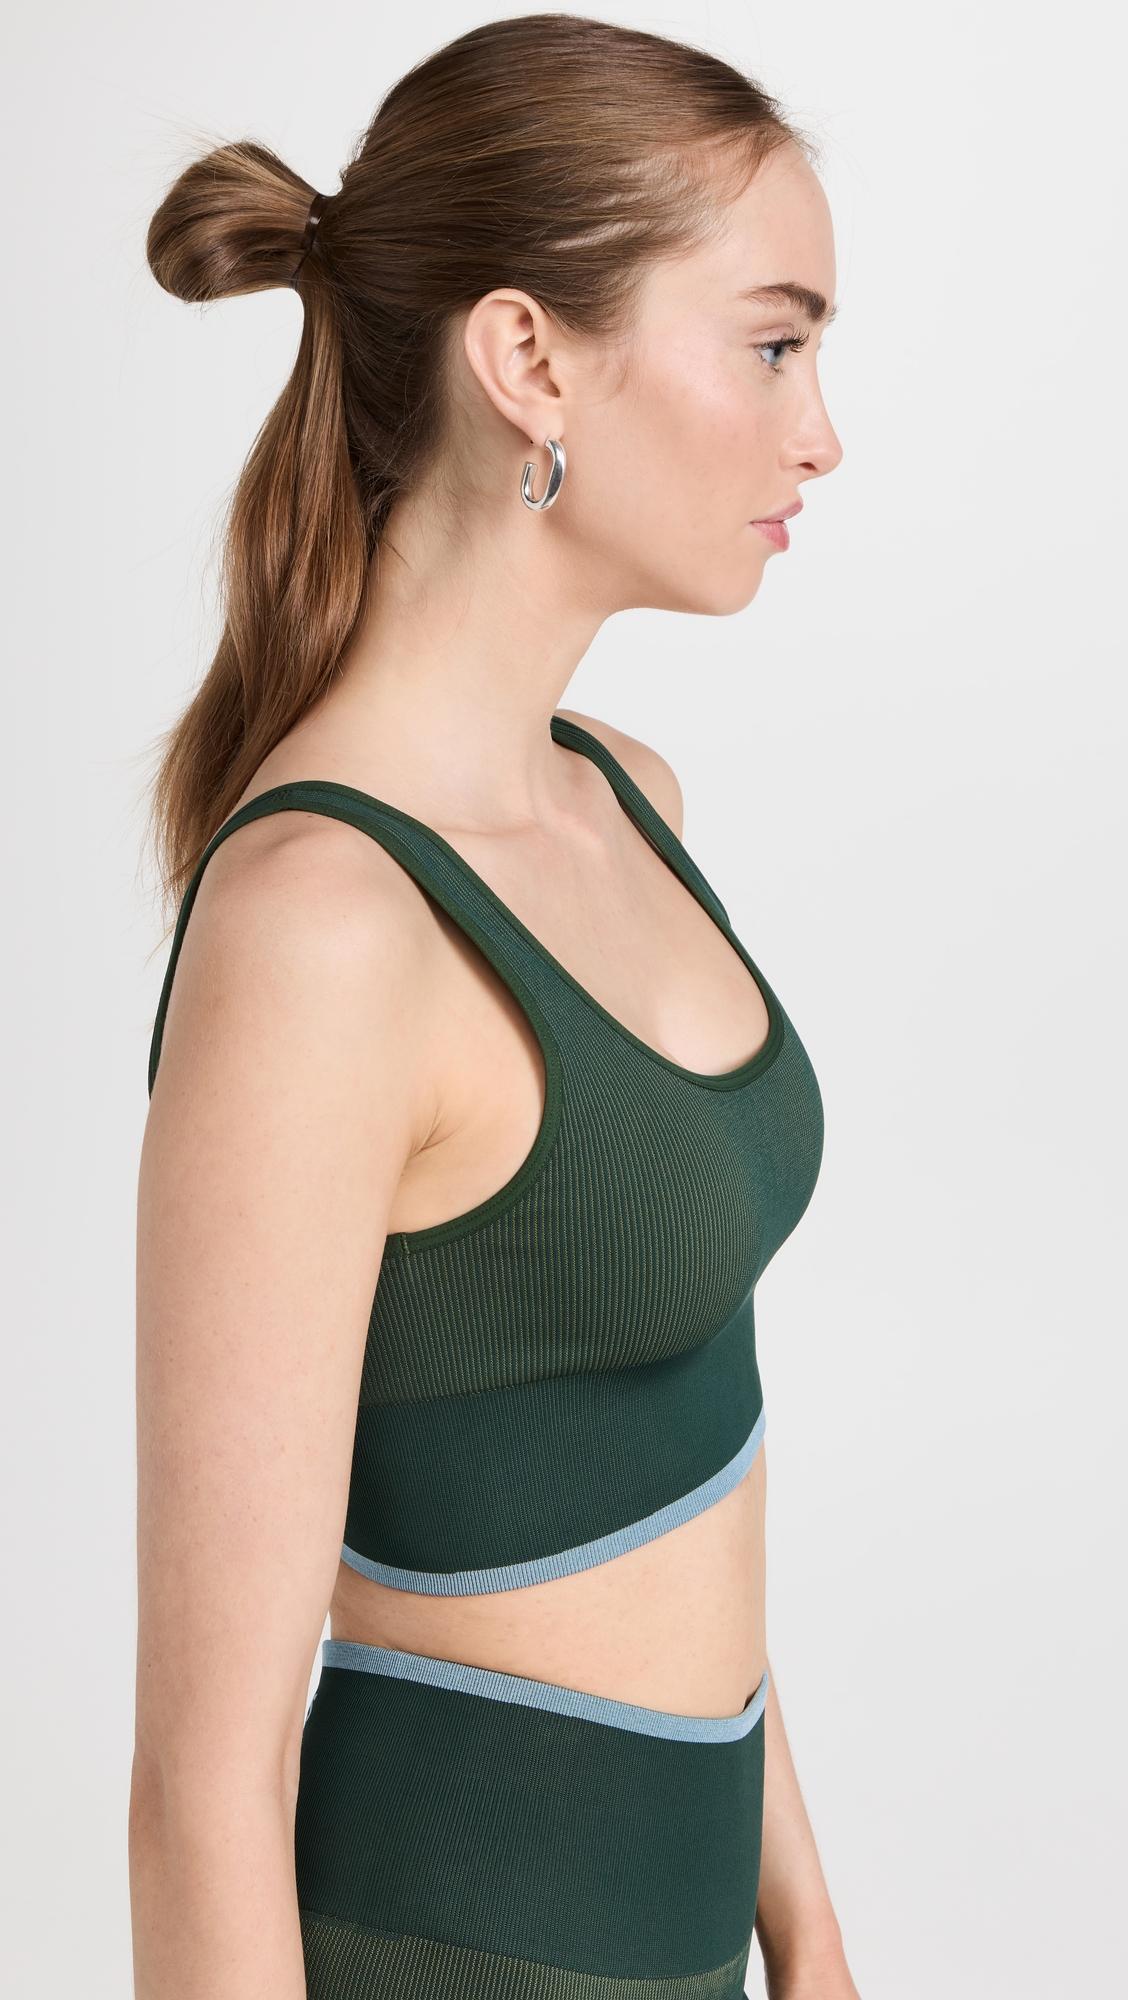 Green Racer Back Sport Bra by Outdoor Voices on Sale